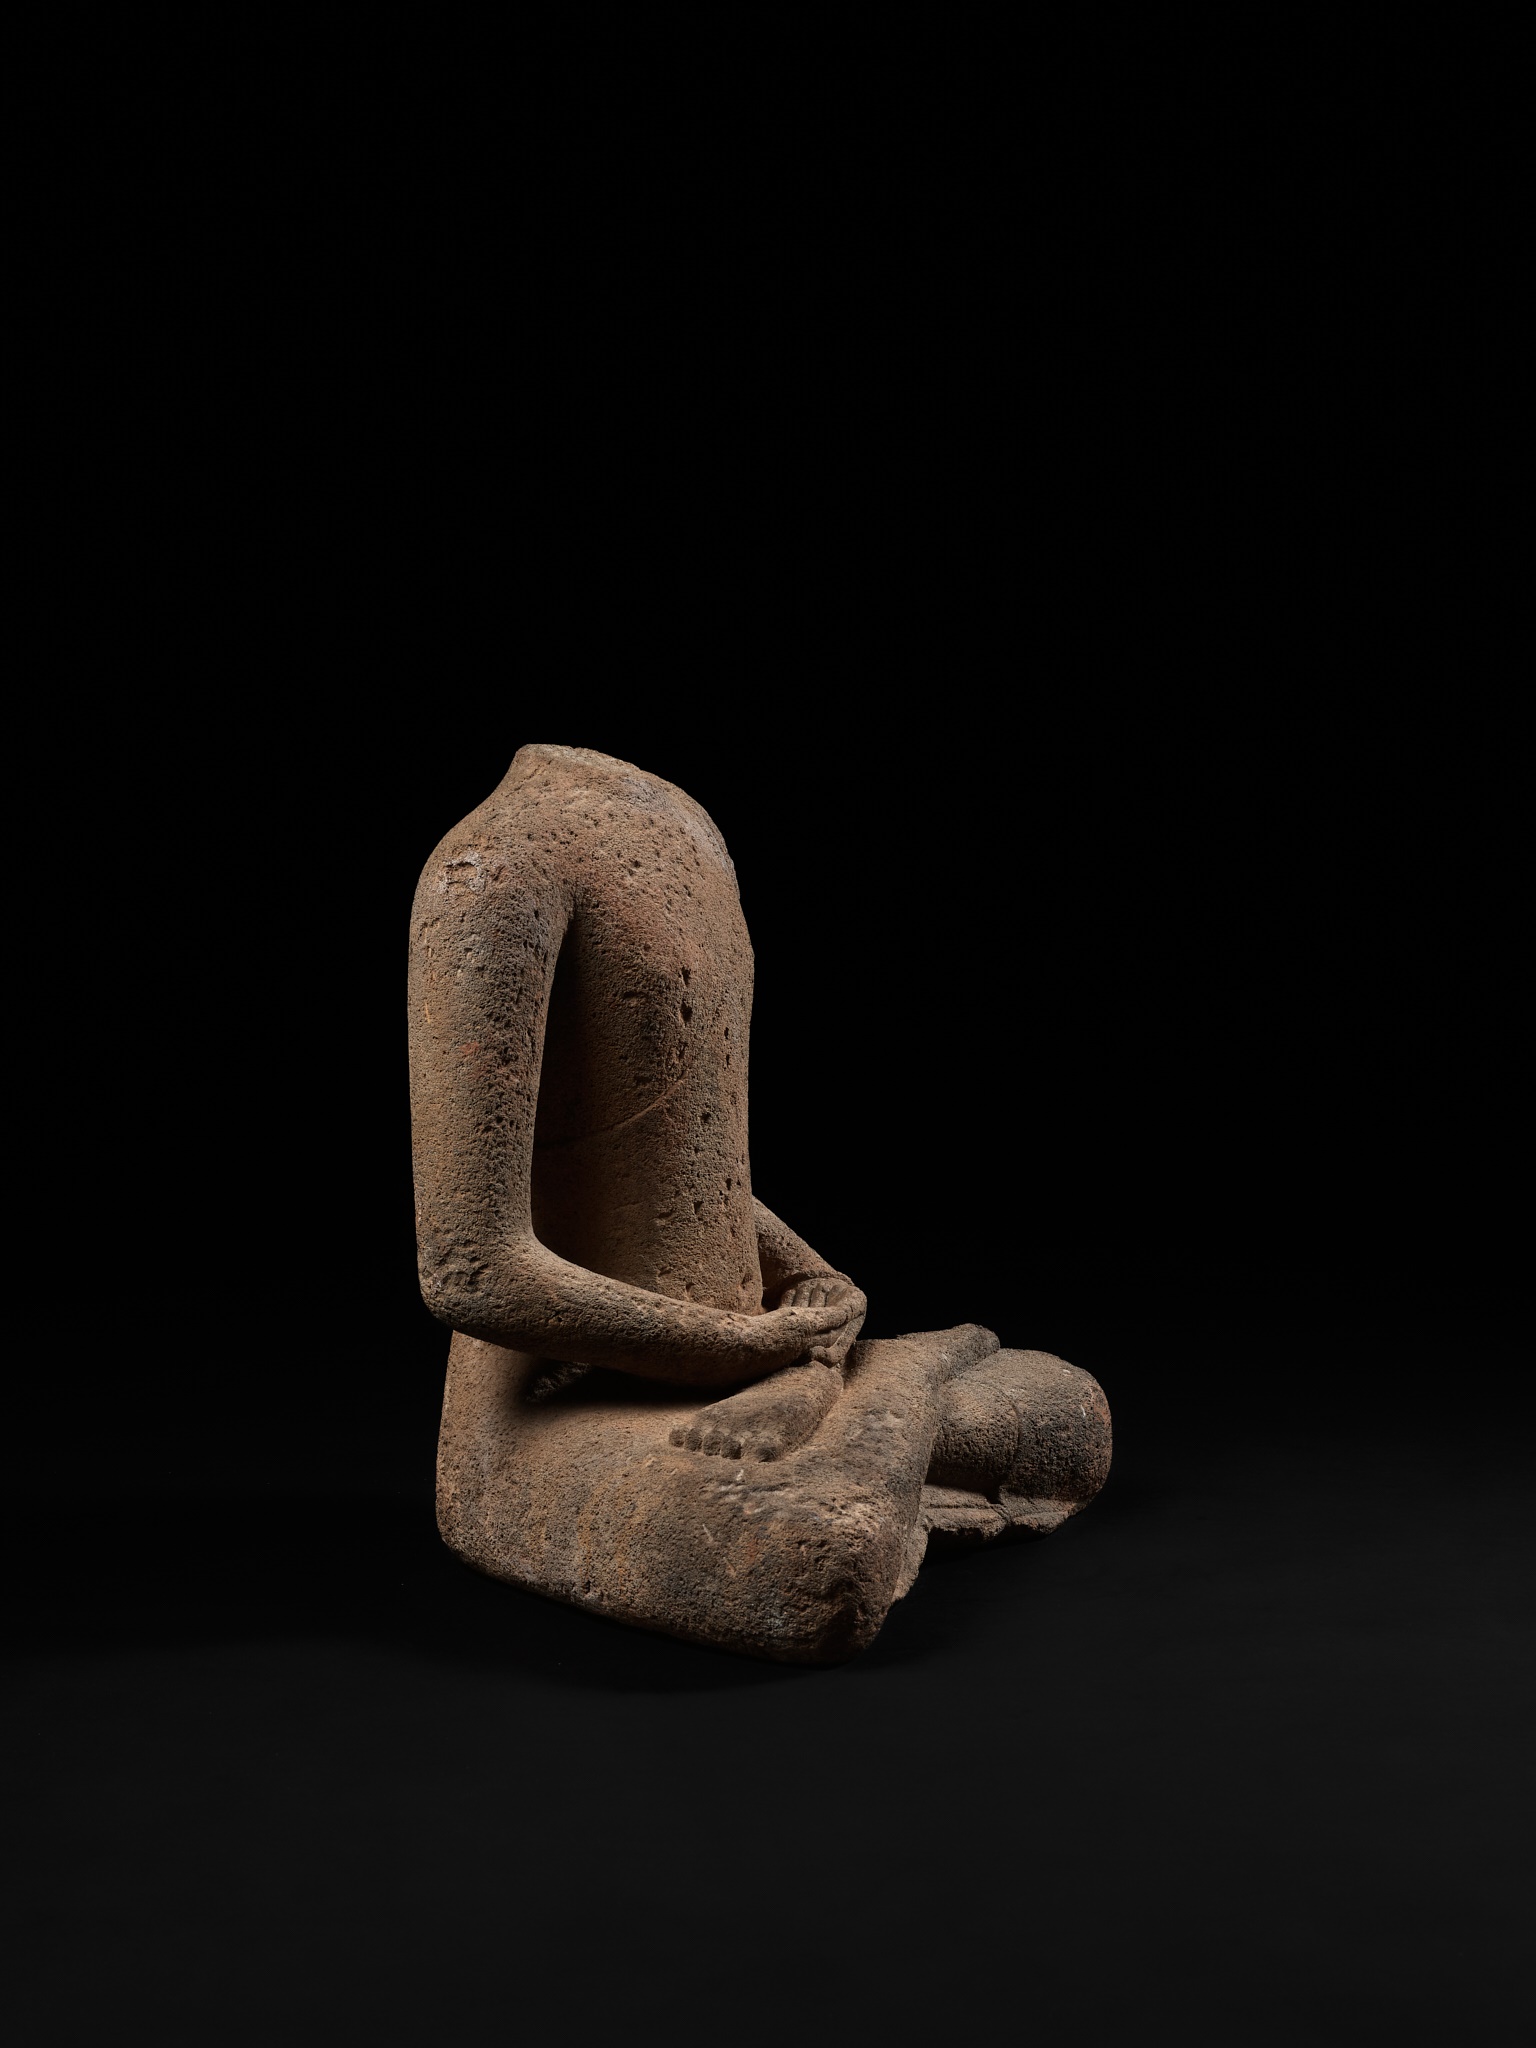 A RARE AND LARGE ANDESITE TORSO OF BUDDHA AMITABHA, CENTRAL JAVANESE PERIOD, SHAILENDRA DYNASTY - Image 14 of 16